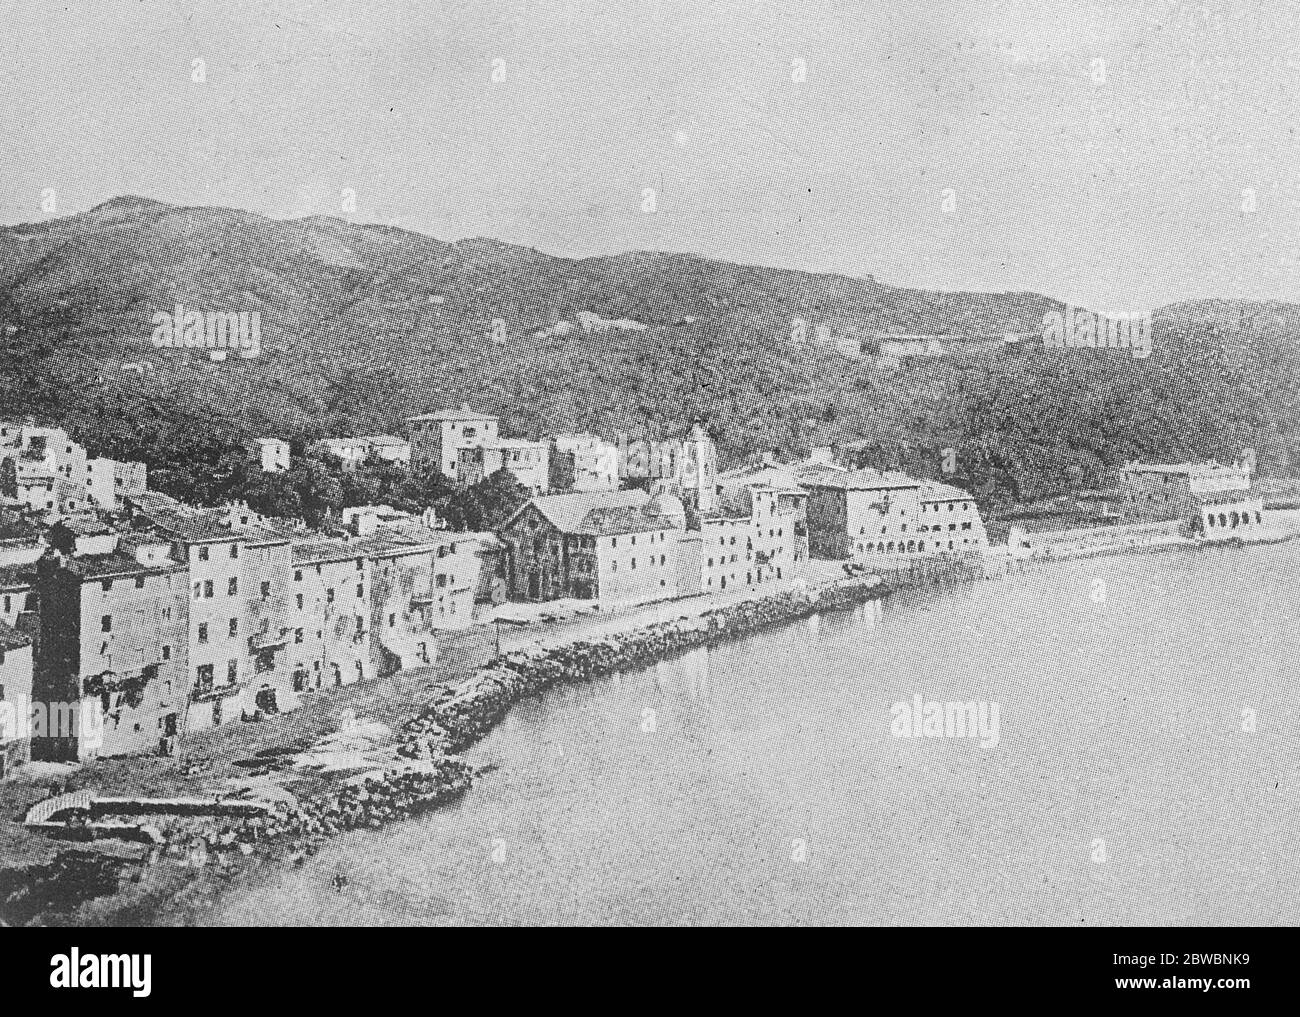 Fort Blown Up By Lightning  Lightning , during a heavy thunderstorm , blew up the fort of Falconara , of Genoa . Over a hundread people were killed and hundreads of more wounded and taken to hospital   Here is a view of San Terenzo  29 September 1922 Stock Photo